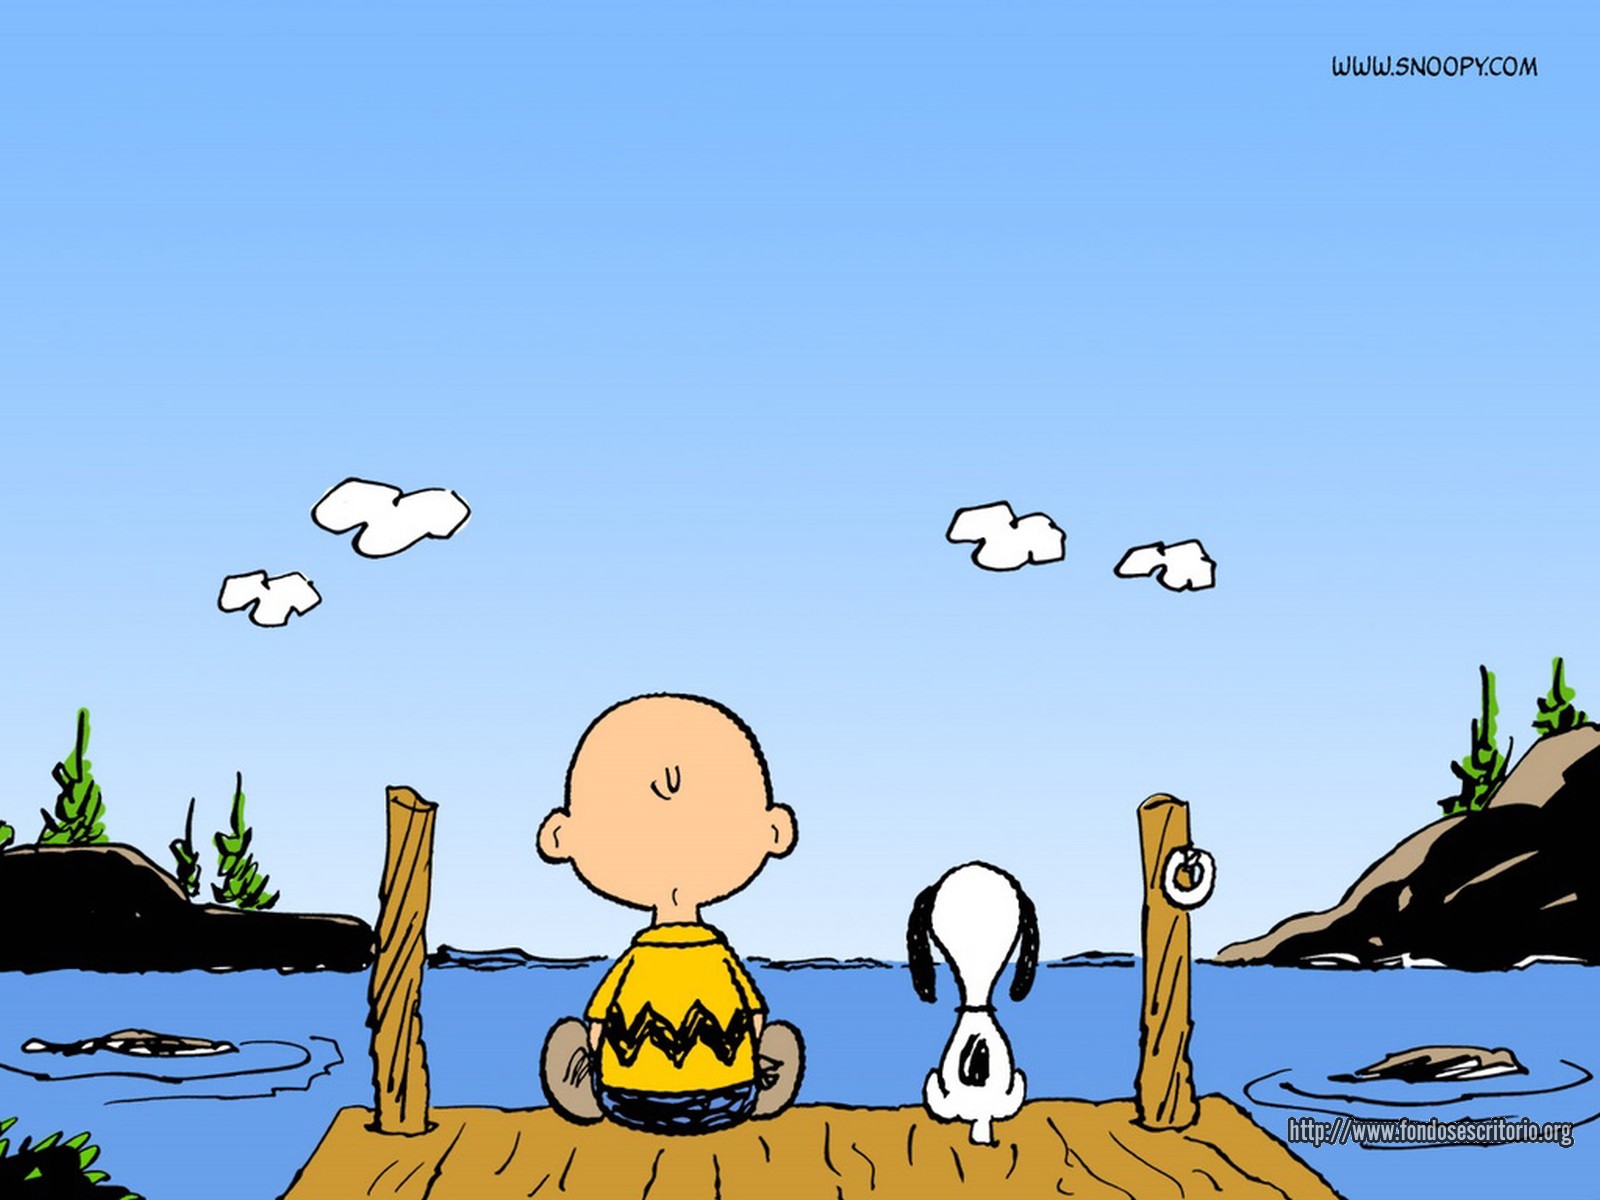 Snoopy peanuts desktop wallpaper Picture Wallpaper Collections 1600x1200